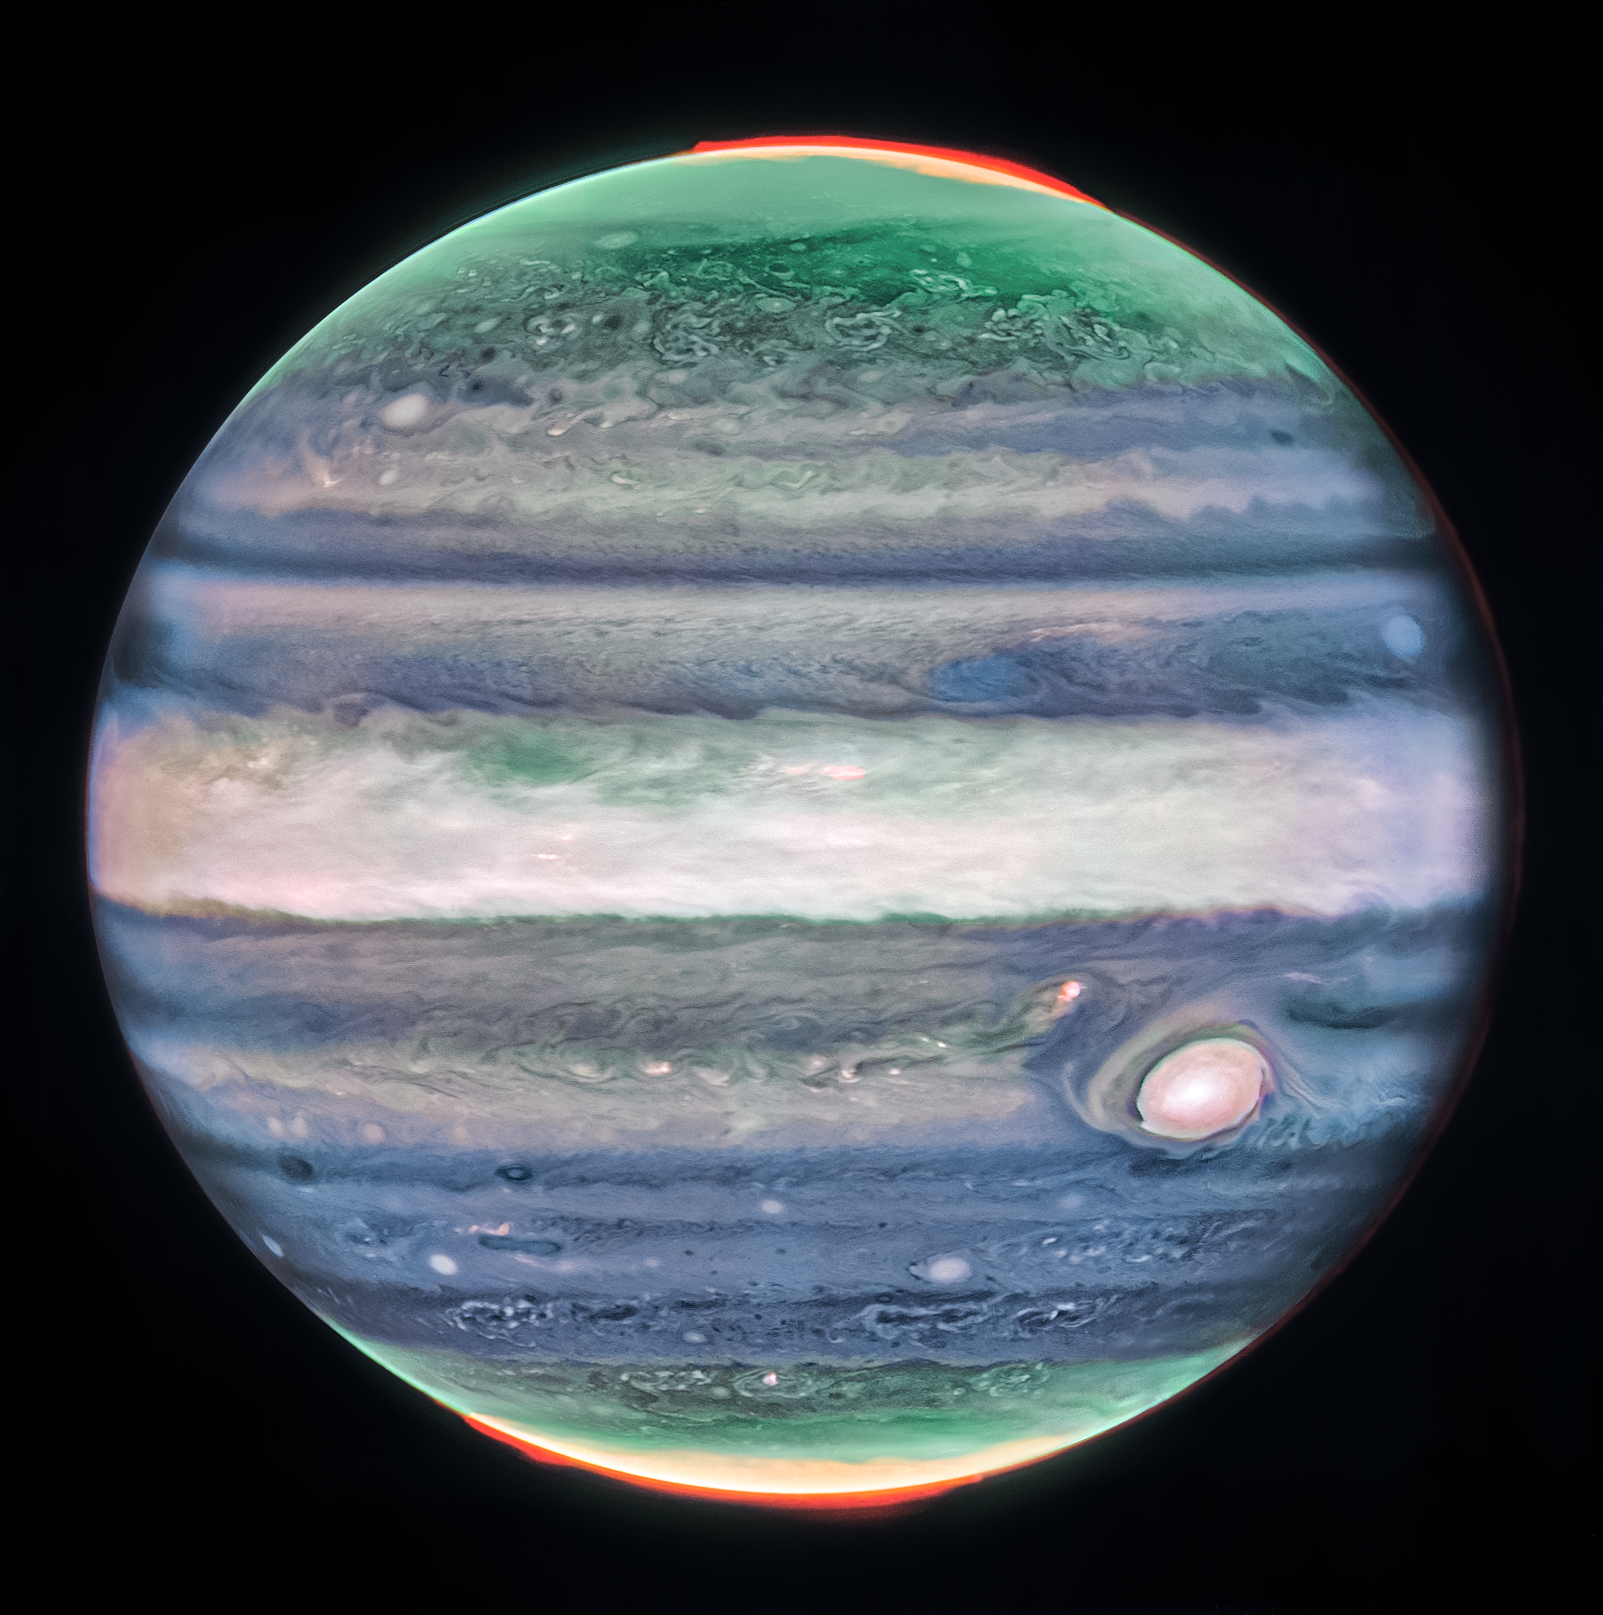 This image of Jupiter from NASA’s James Webb Space Telescope’s NIRCam (Near-Infrared Camera) shows stunning details of the majestic planet in infrared light. Credits: NASA, ESA, CSA, STScI, Ricardo Hueso (UPV), Imke de Pater (UC Berkeley), Thierry Fouchet (Observatory of Paris), Leigh Fletcher (University of Leicester), Michael H. Wong (UC Berkeley), Joseph DePasquale (STScI)